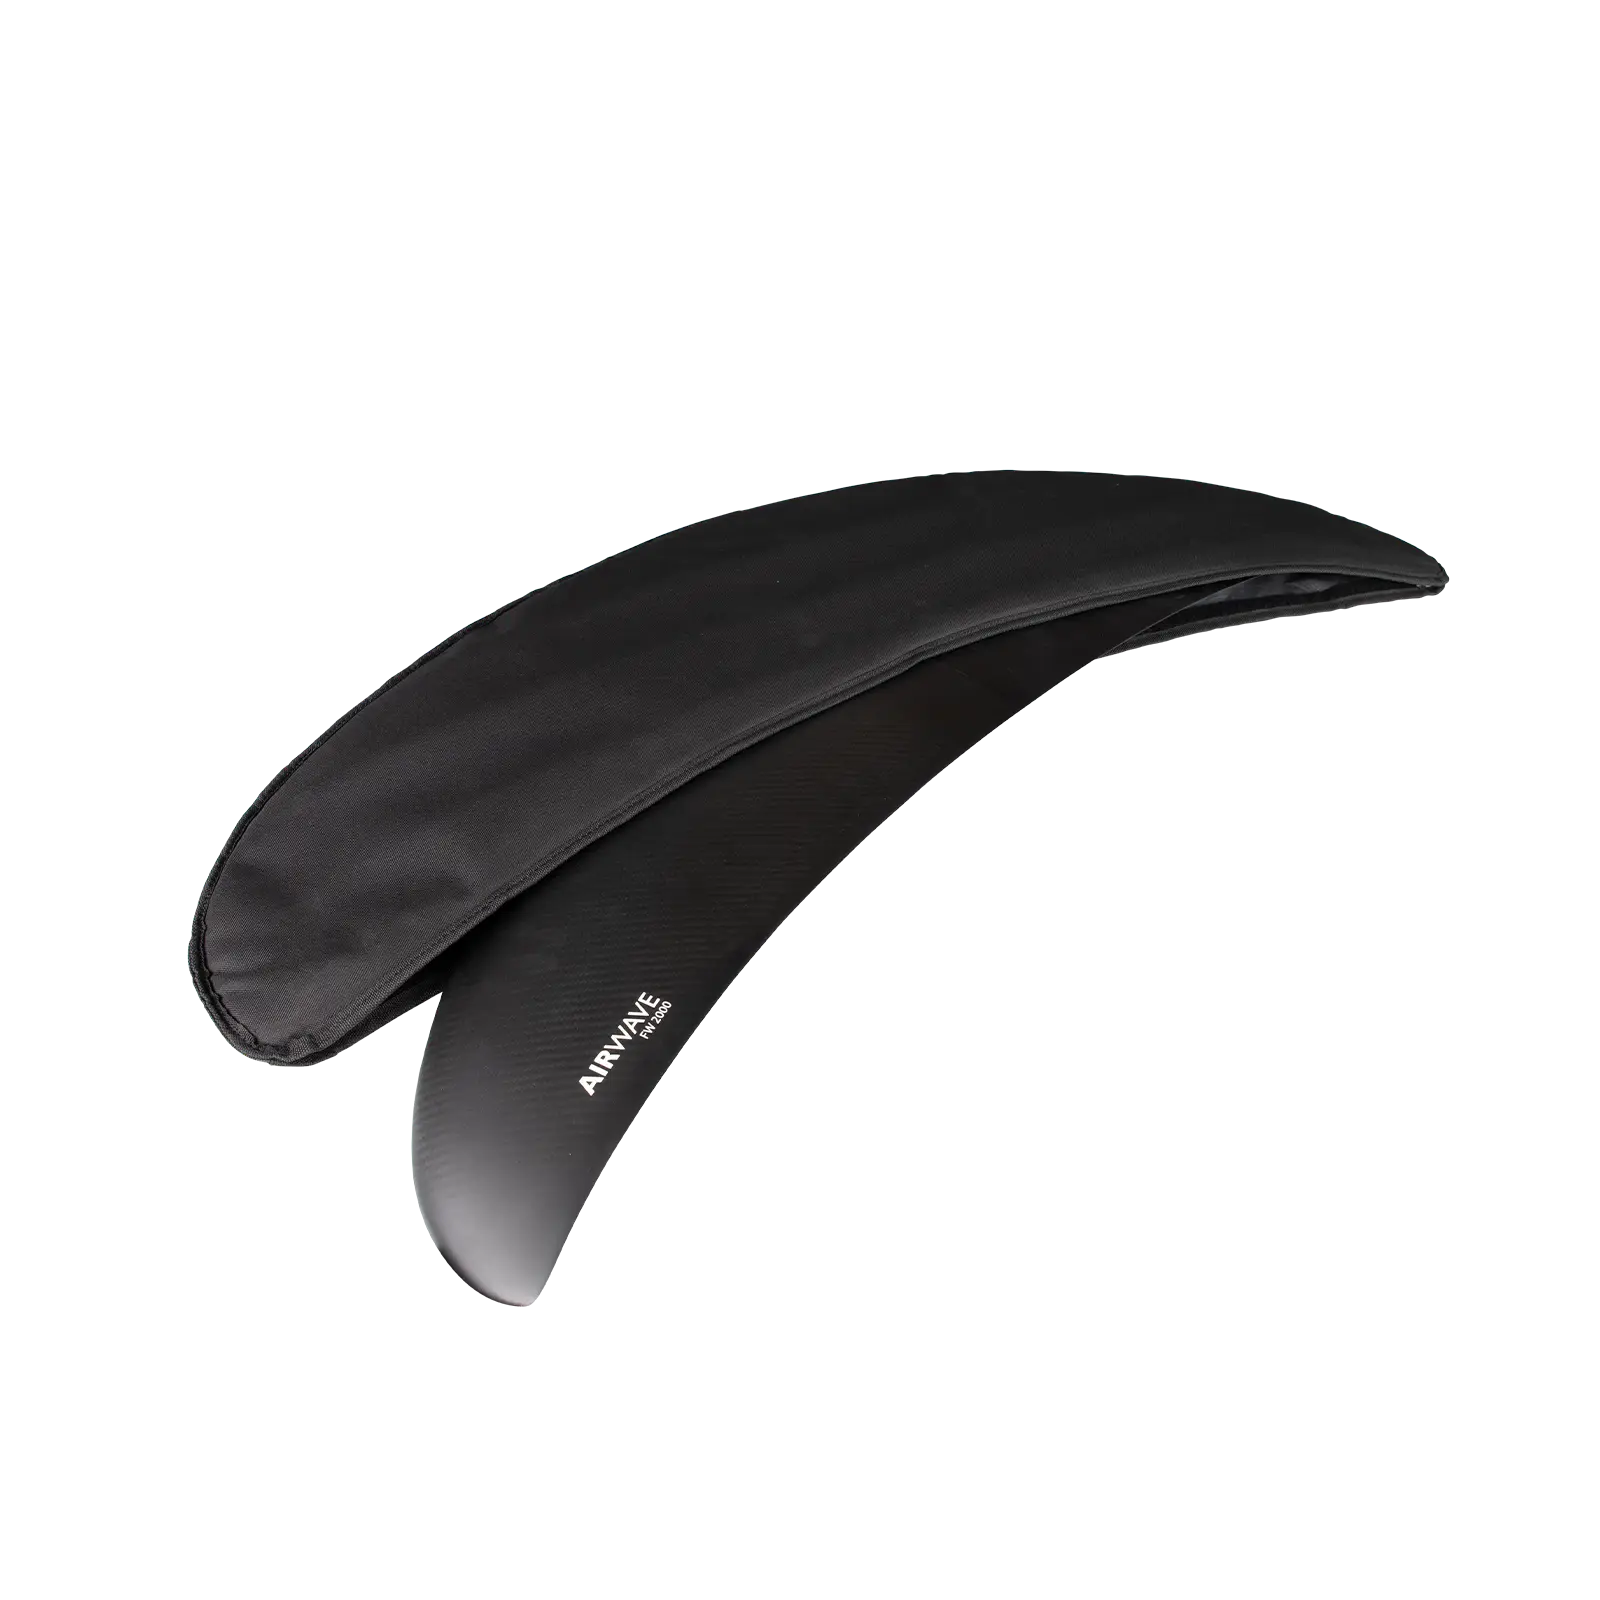 NSP Airwave FW 2000 Front Wing    Aroona Surf, Sydney